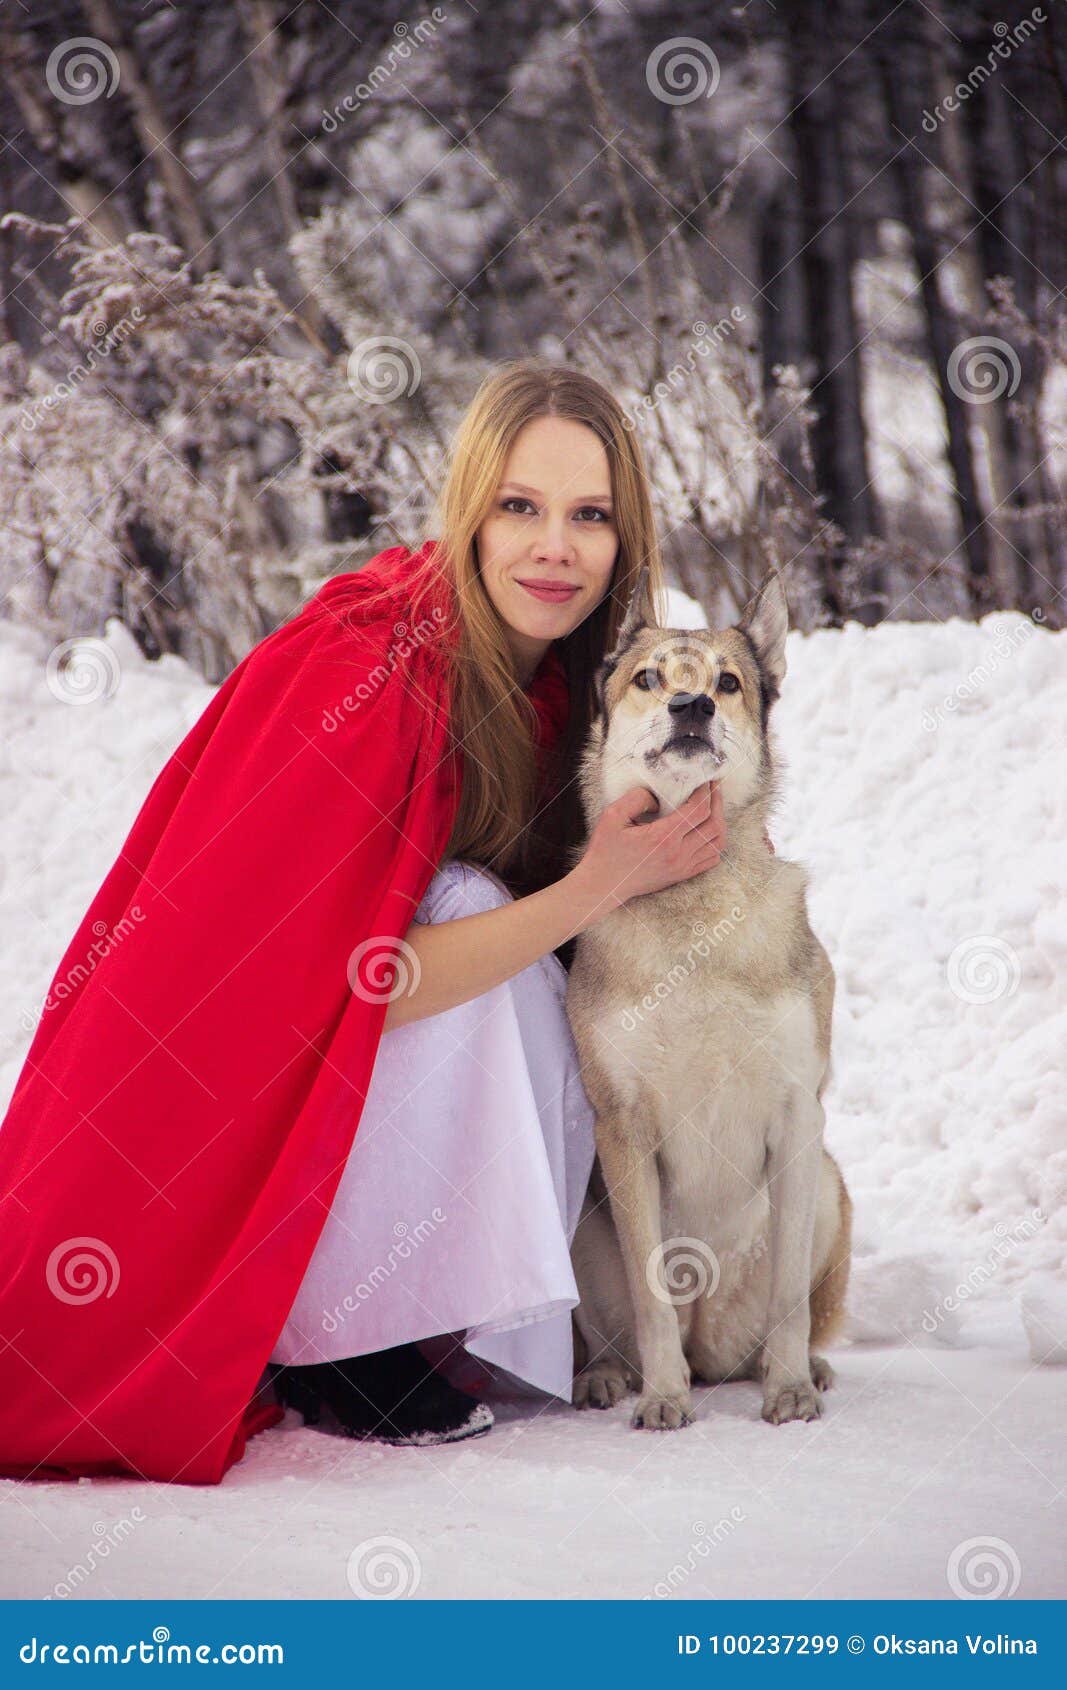 Girl in Little Red Riding Hood with Dog Like a Wolf Stock Image - Image of fashion, outdoor: 100237299